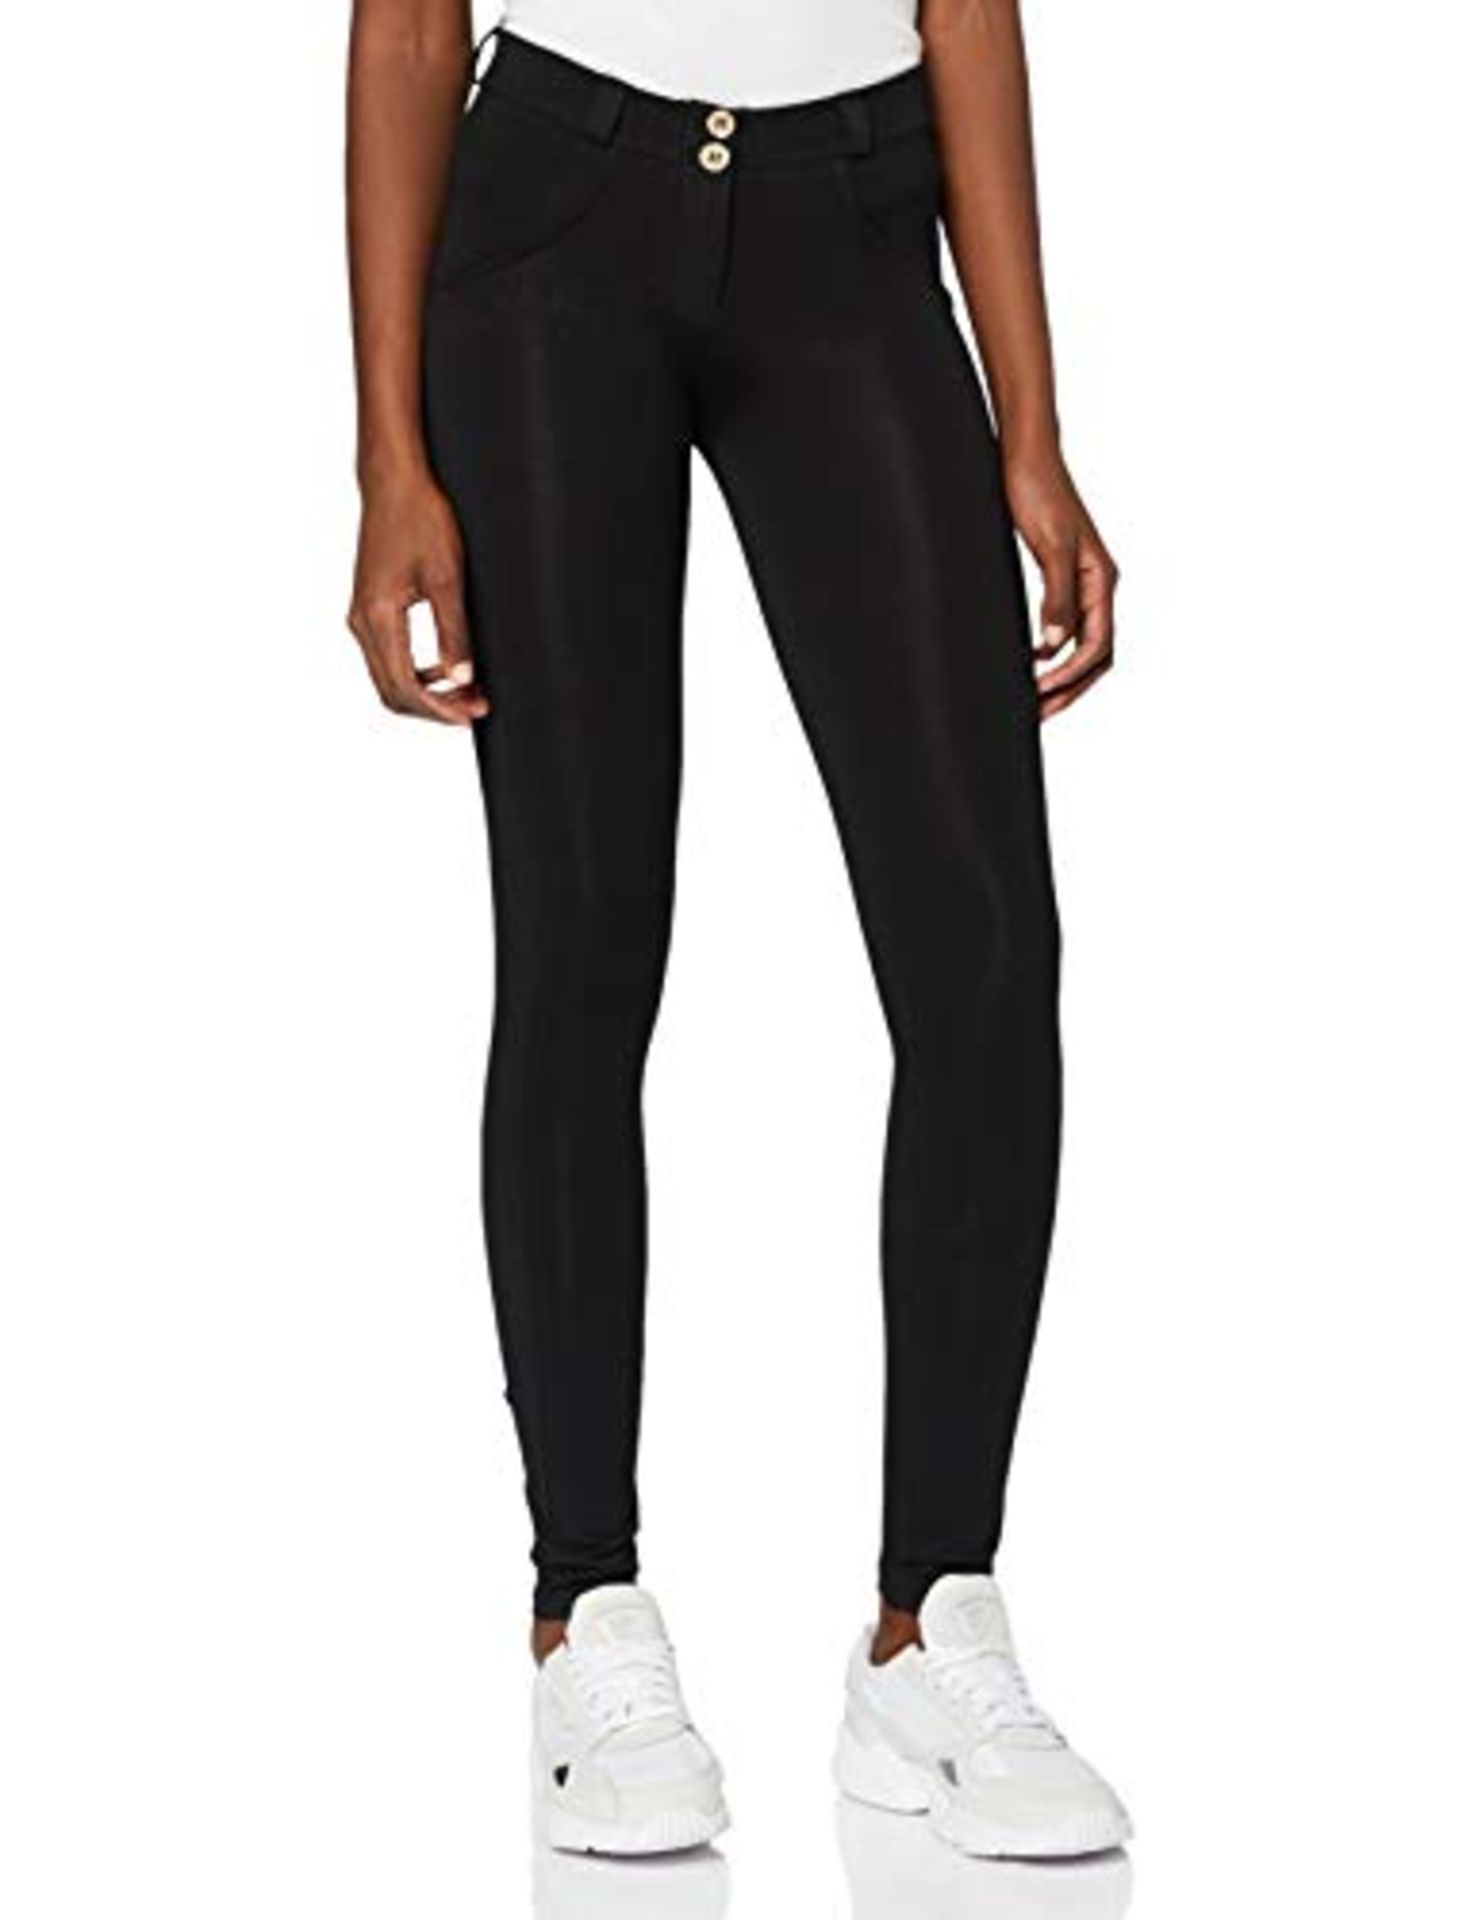 RRP £75.00 Freddy Women's Wrup1rc001 Trousers, Black (Black N0), 36 (Manufacturer Size: Small)